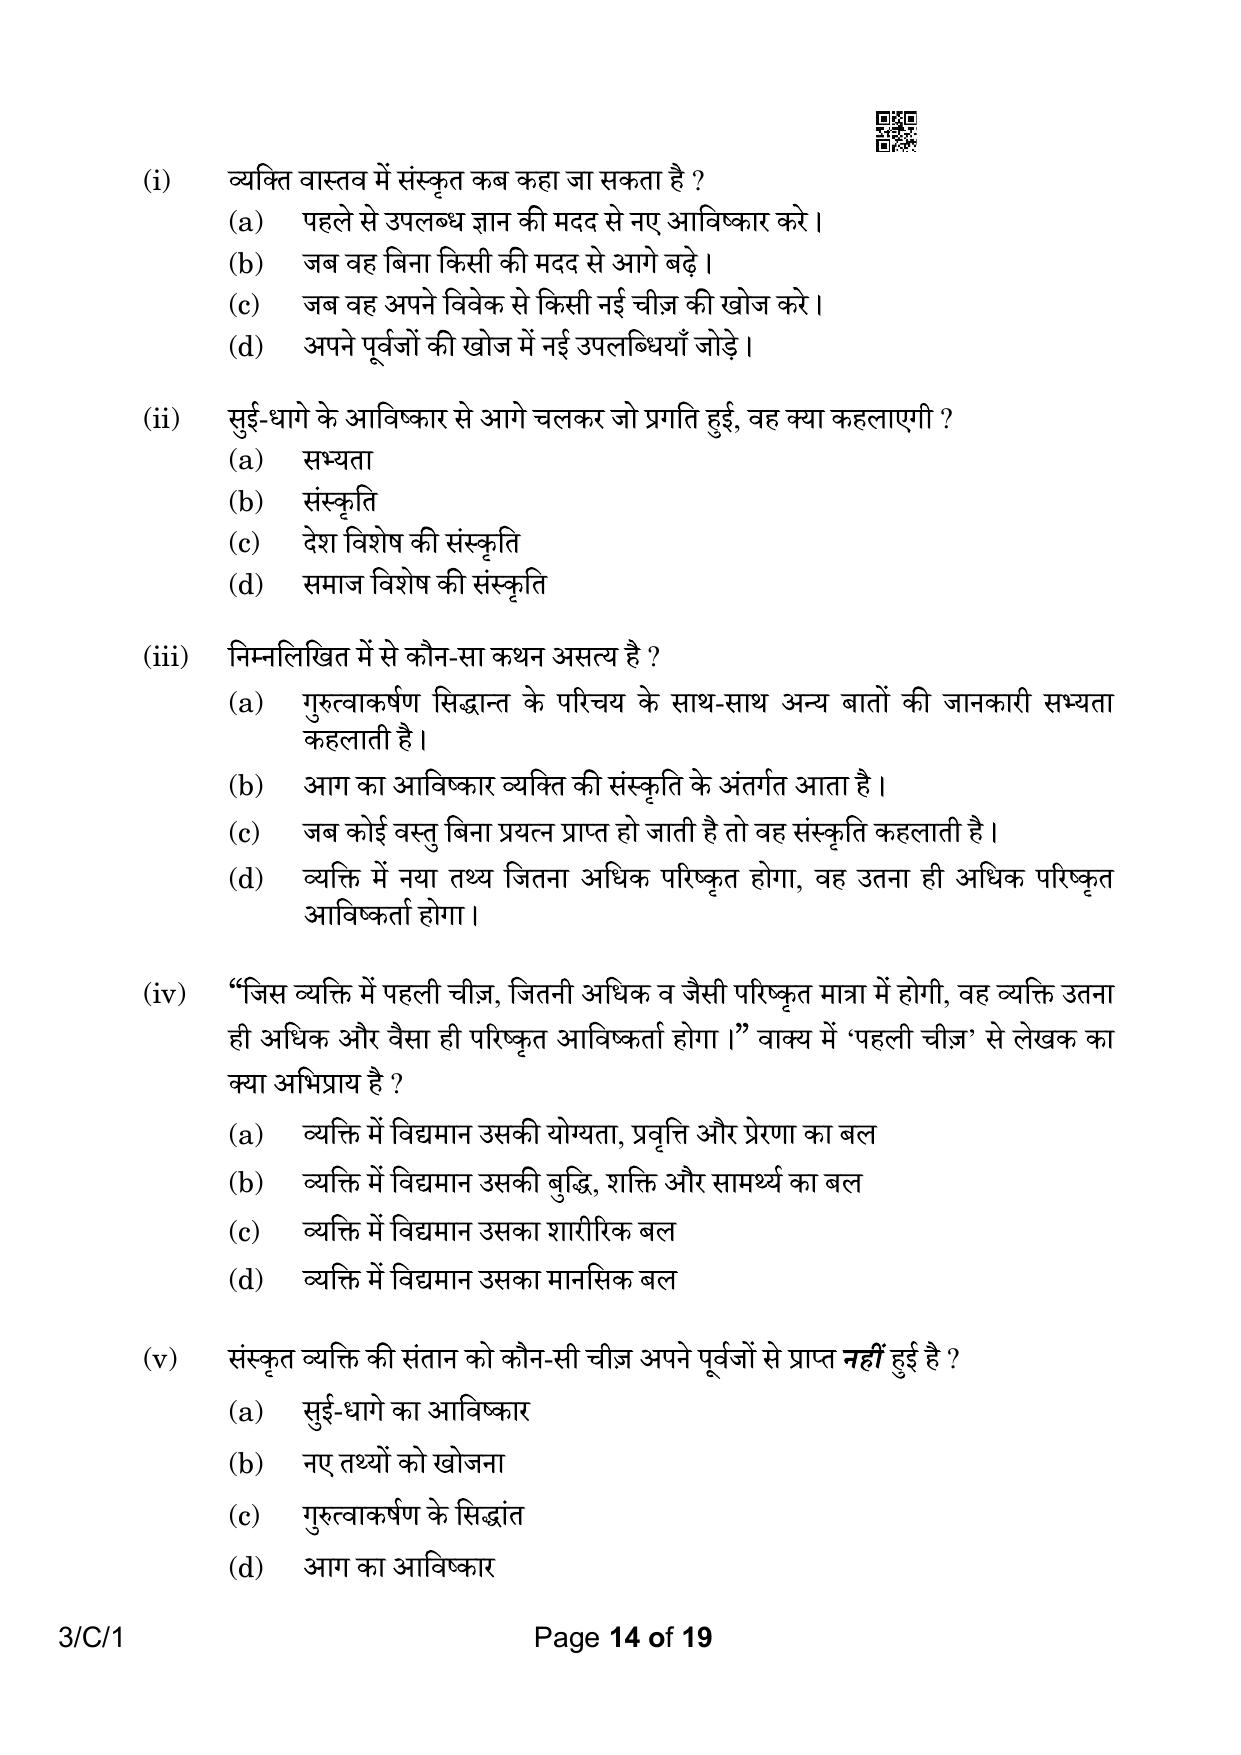 CBSE Class 10 3-1 Hindi A 2023 (Compartment) Question Paper - Page 14